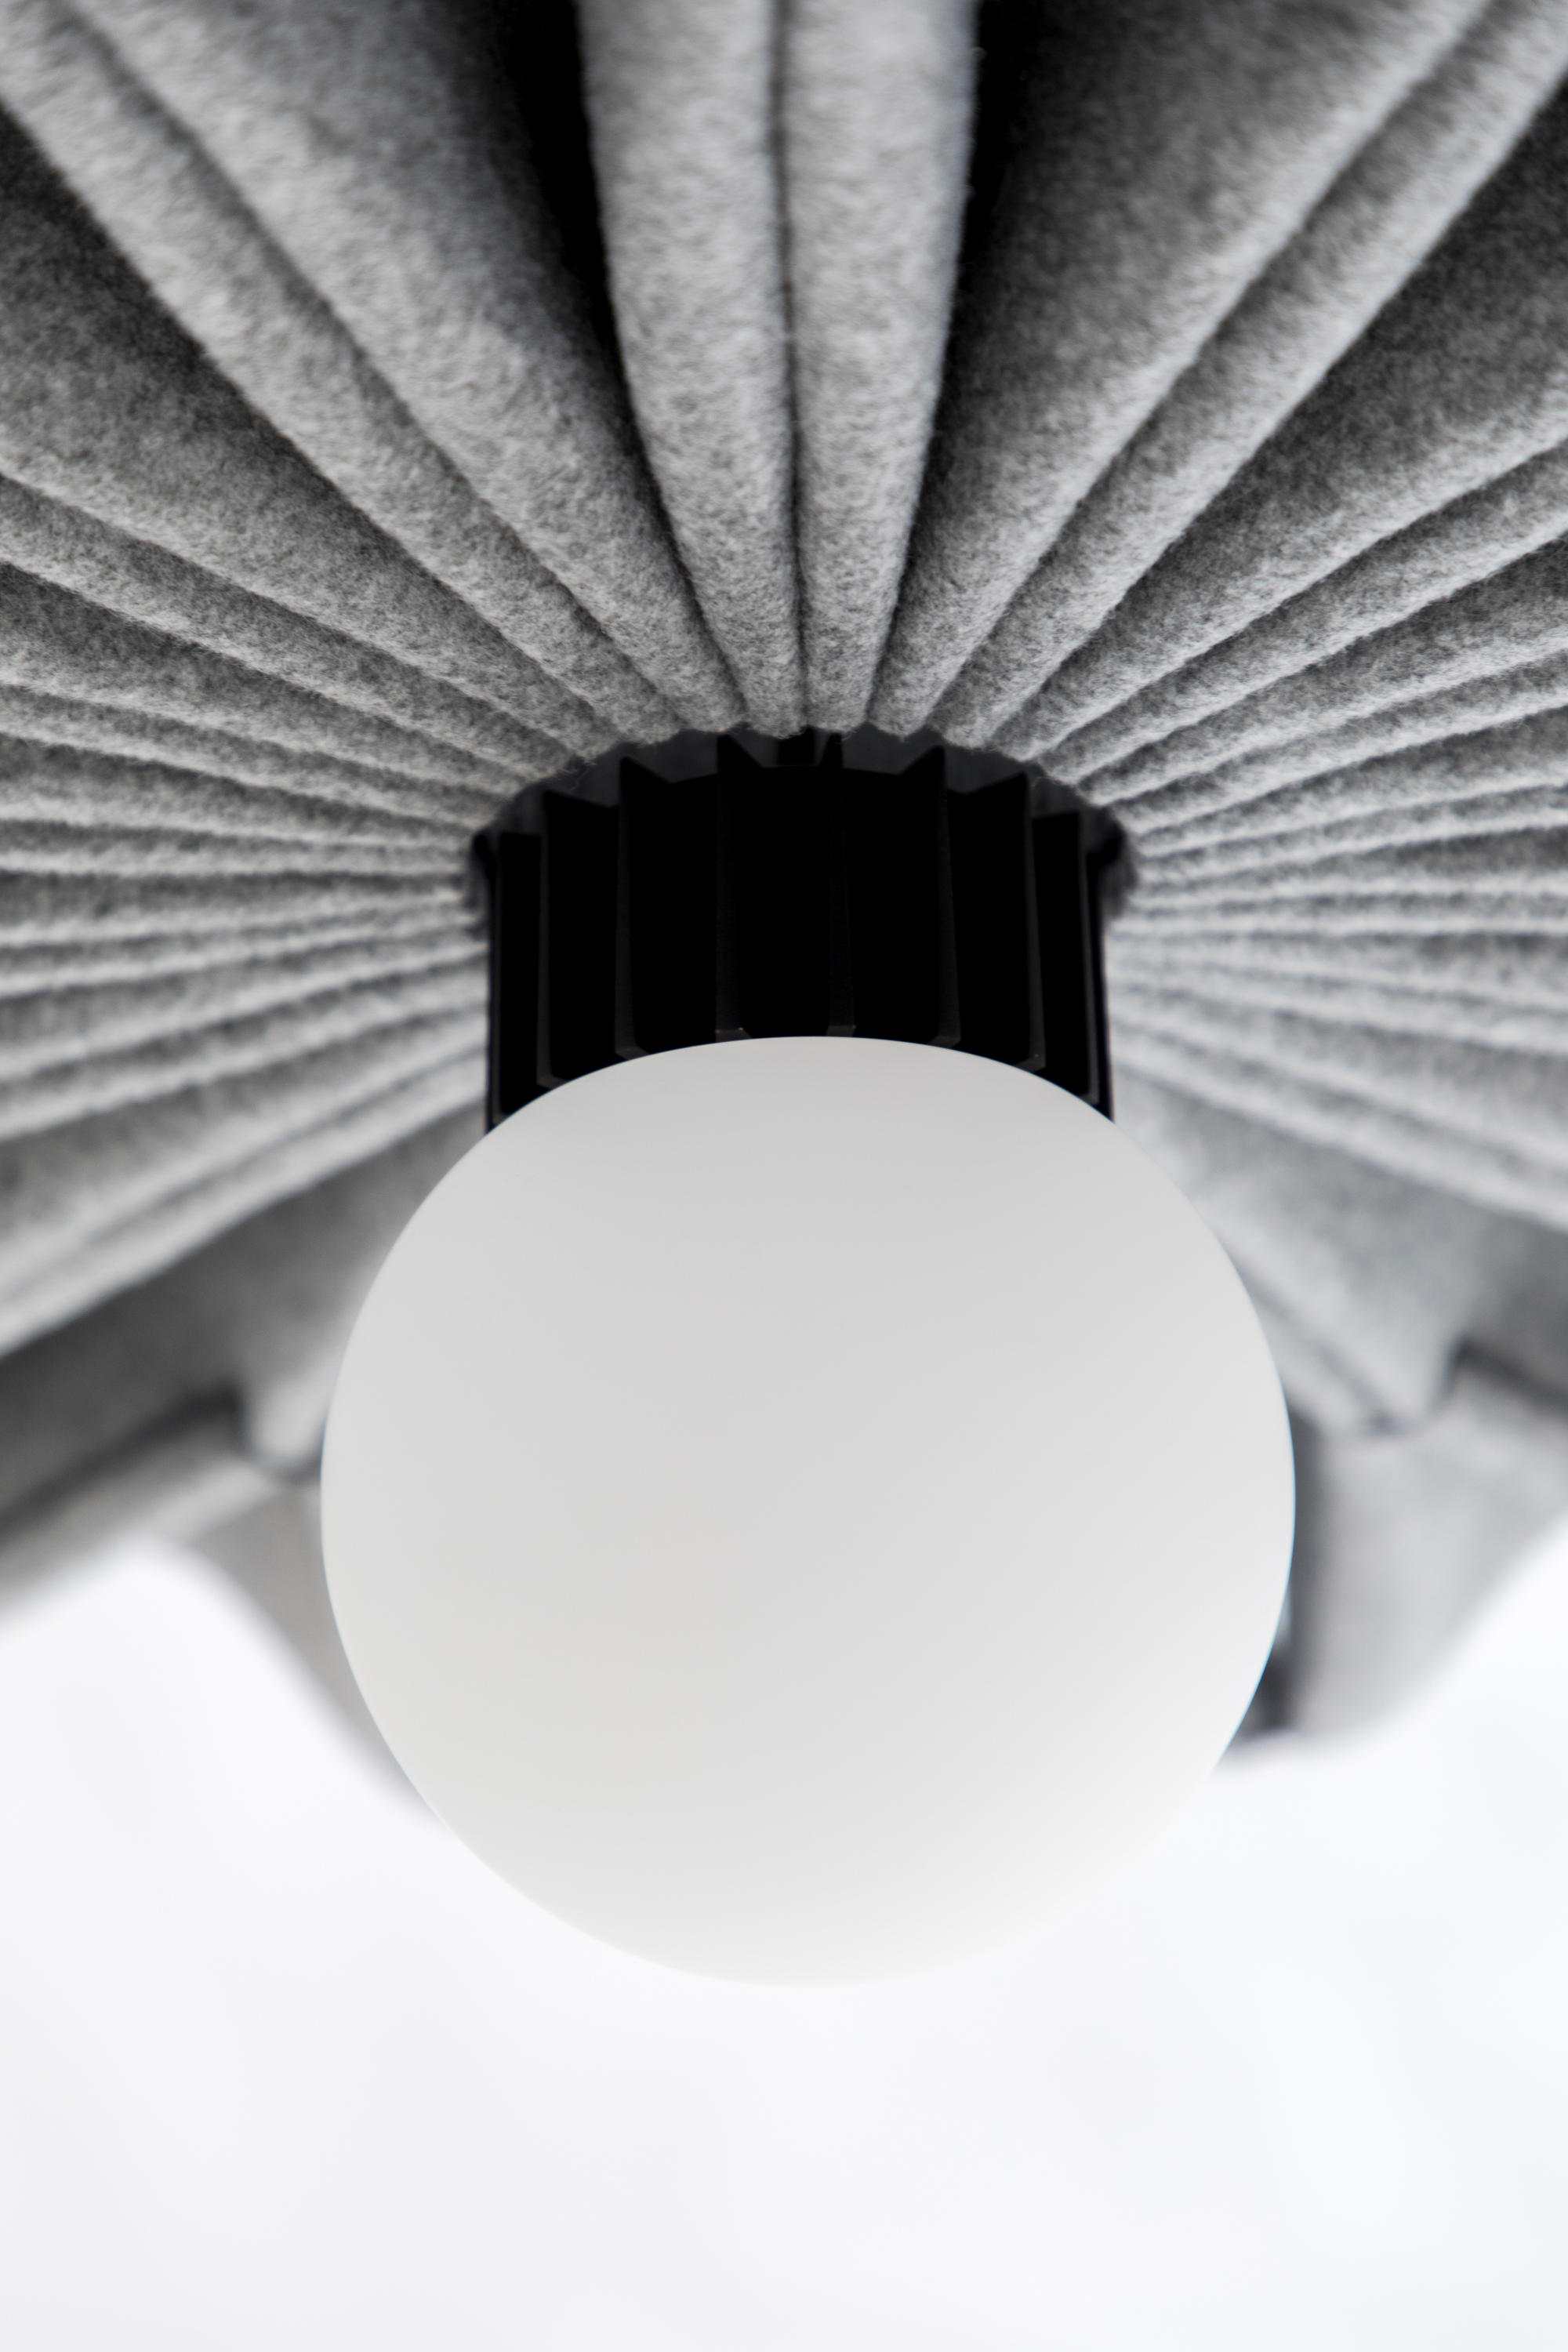 BuzziPleat LED Lamp by 13&9 for BuzziSpace